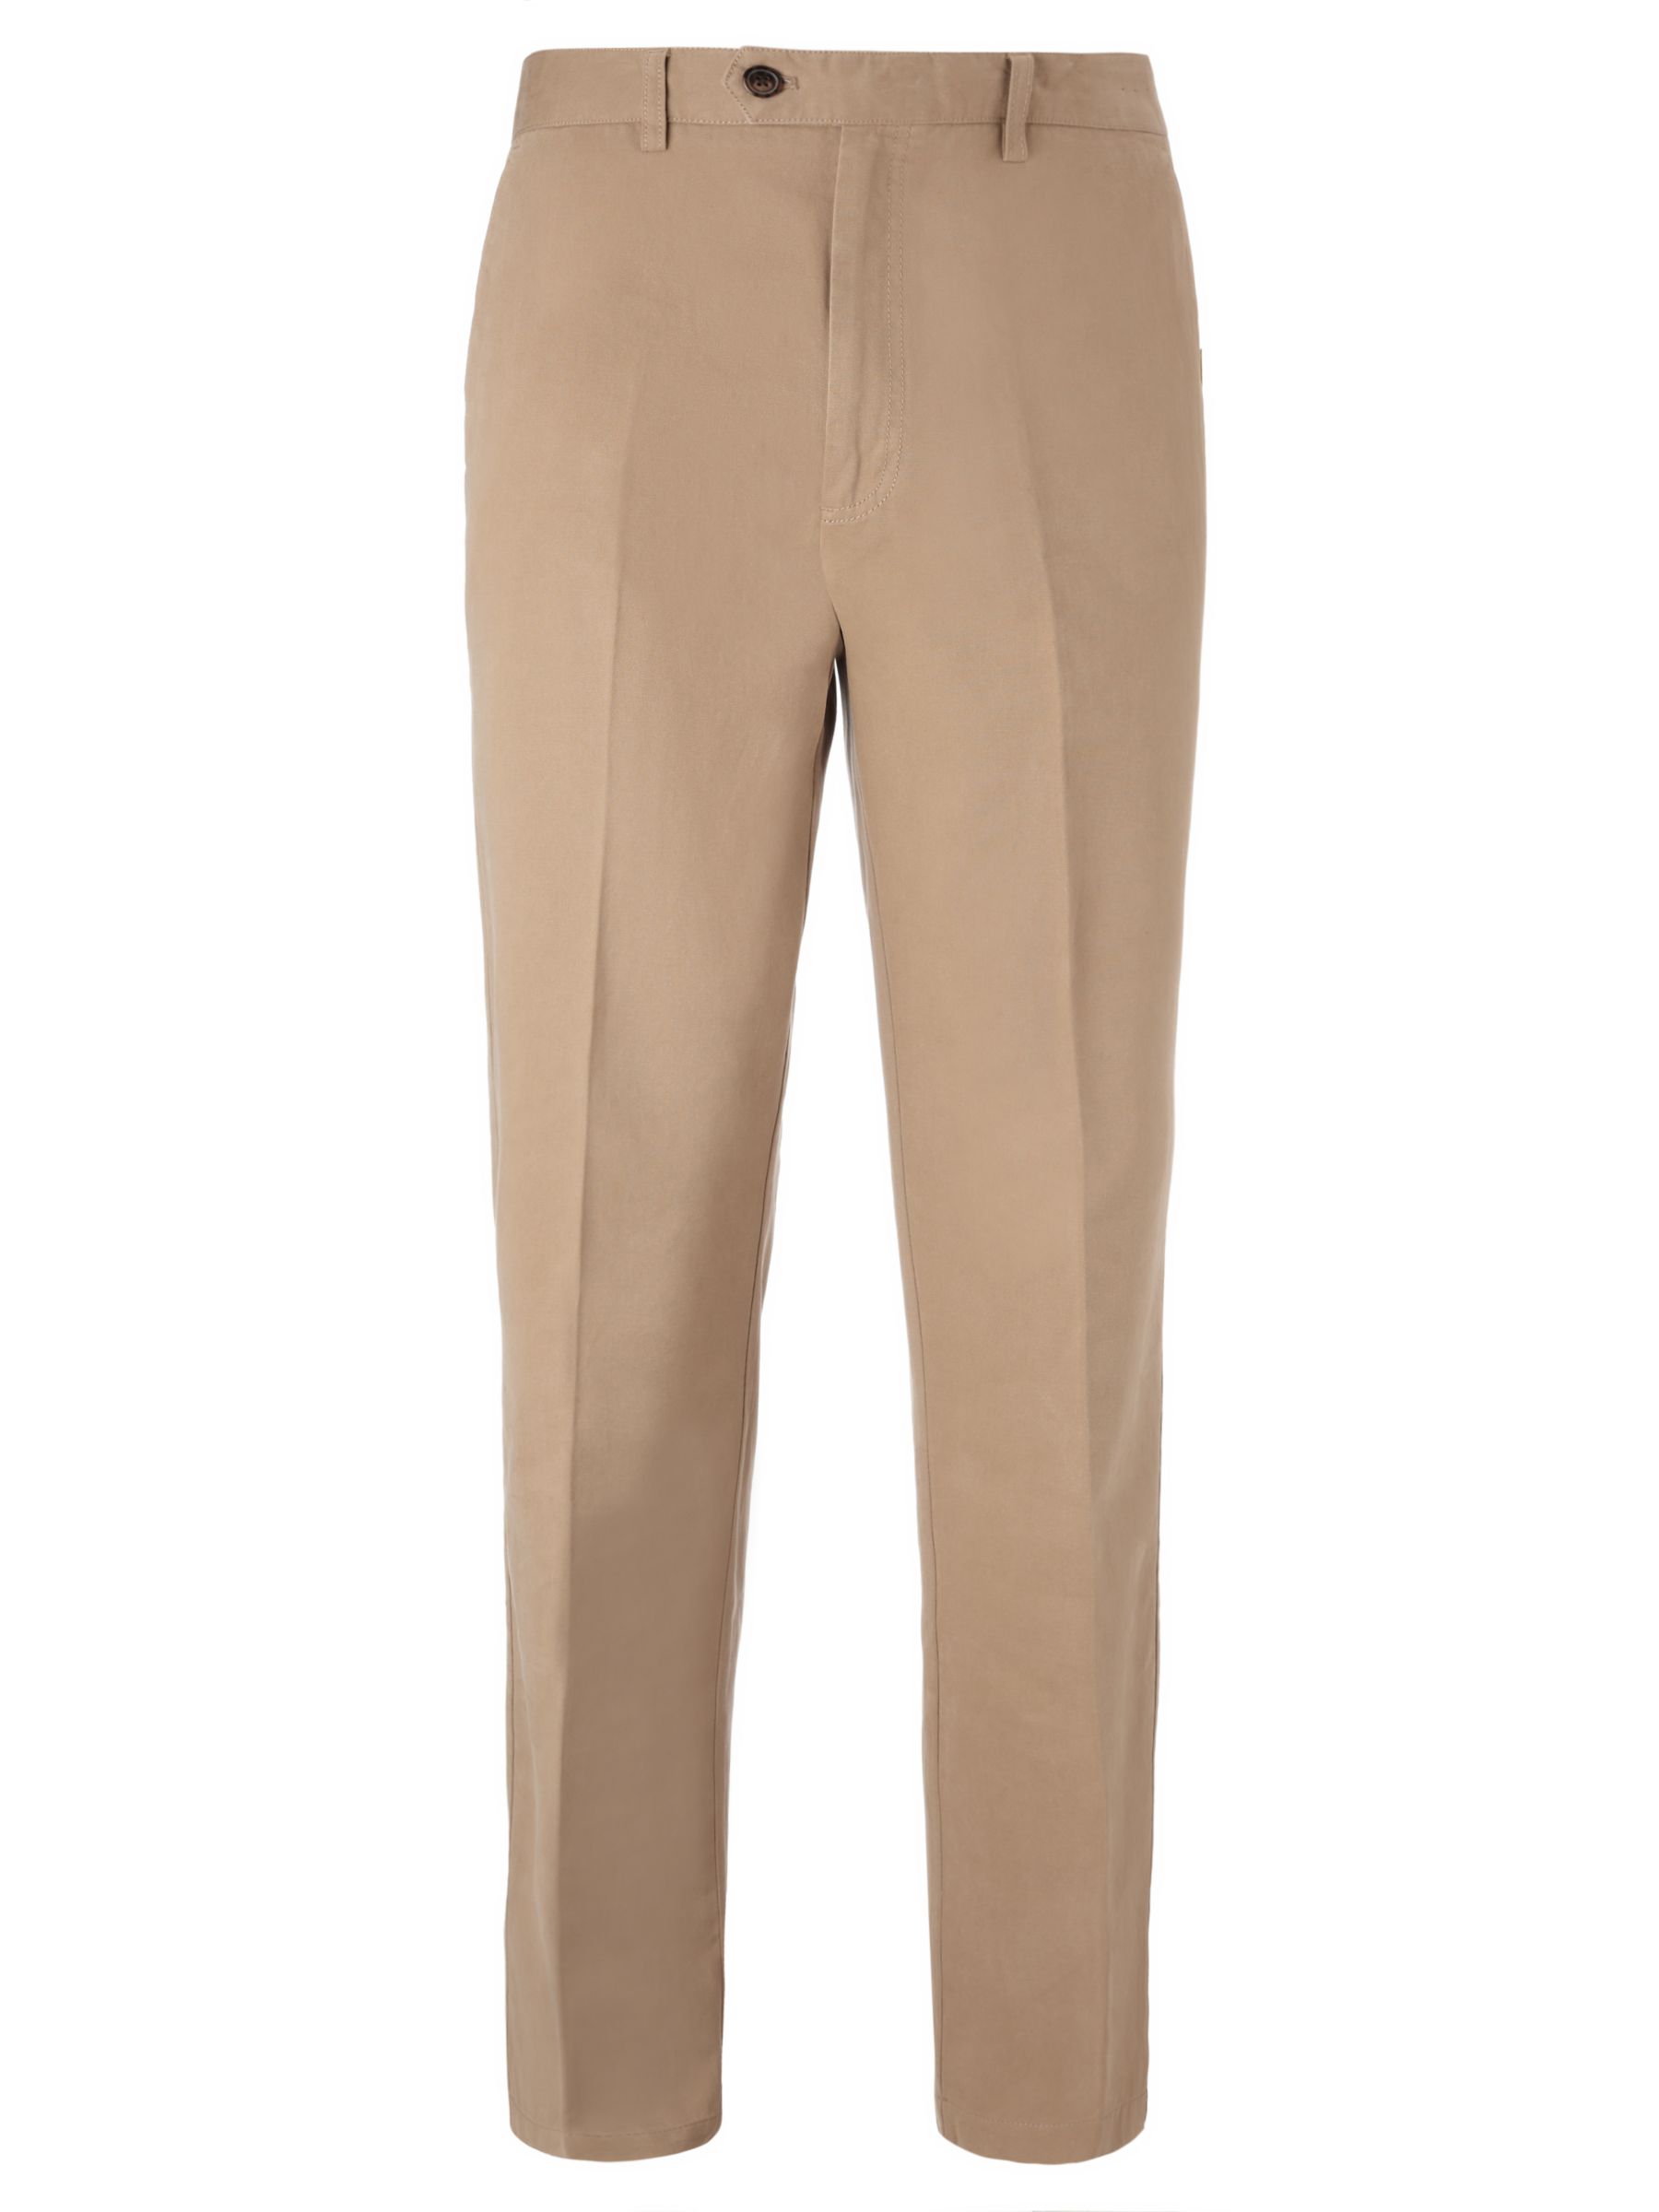 John Lewis & Partners Wrinkle Free Flat Front Trousers, Stone, 30R